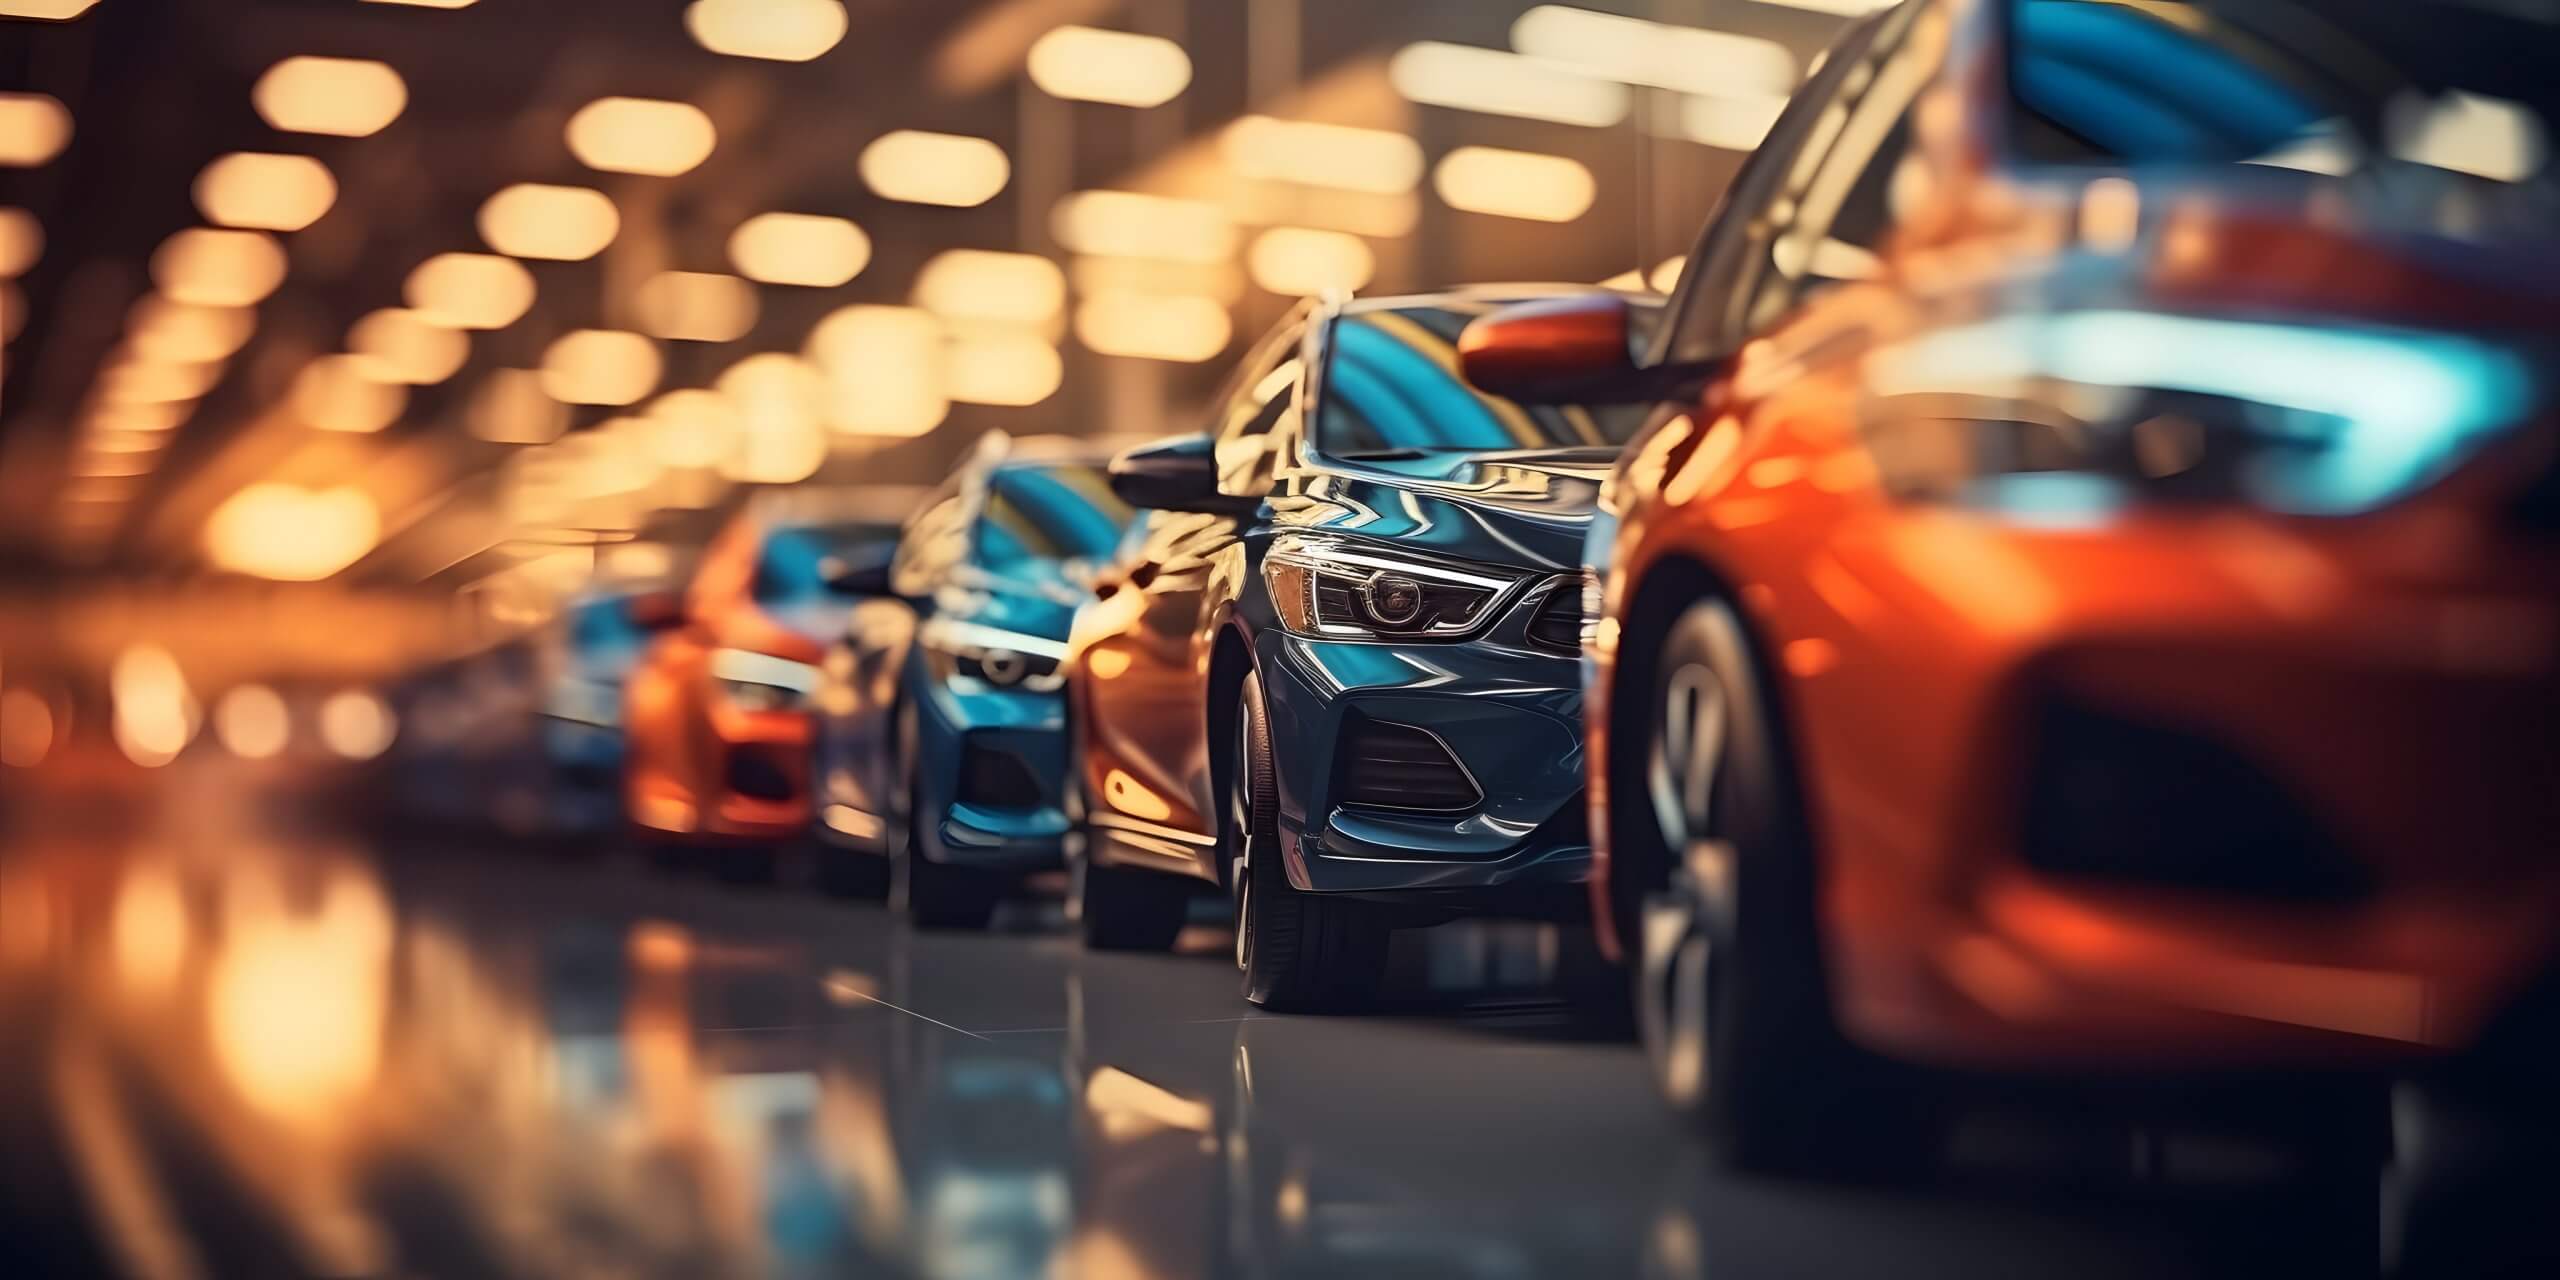 Line of cars in a dealership showroom with an abstract background